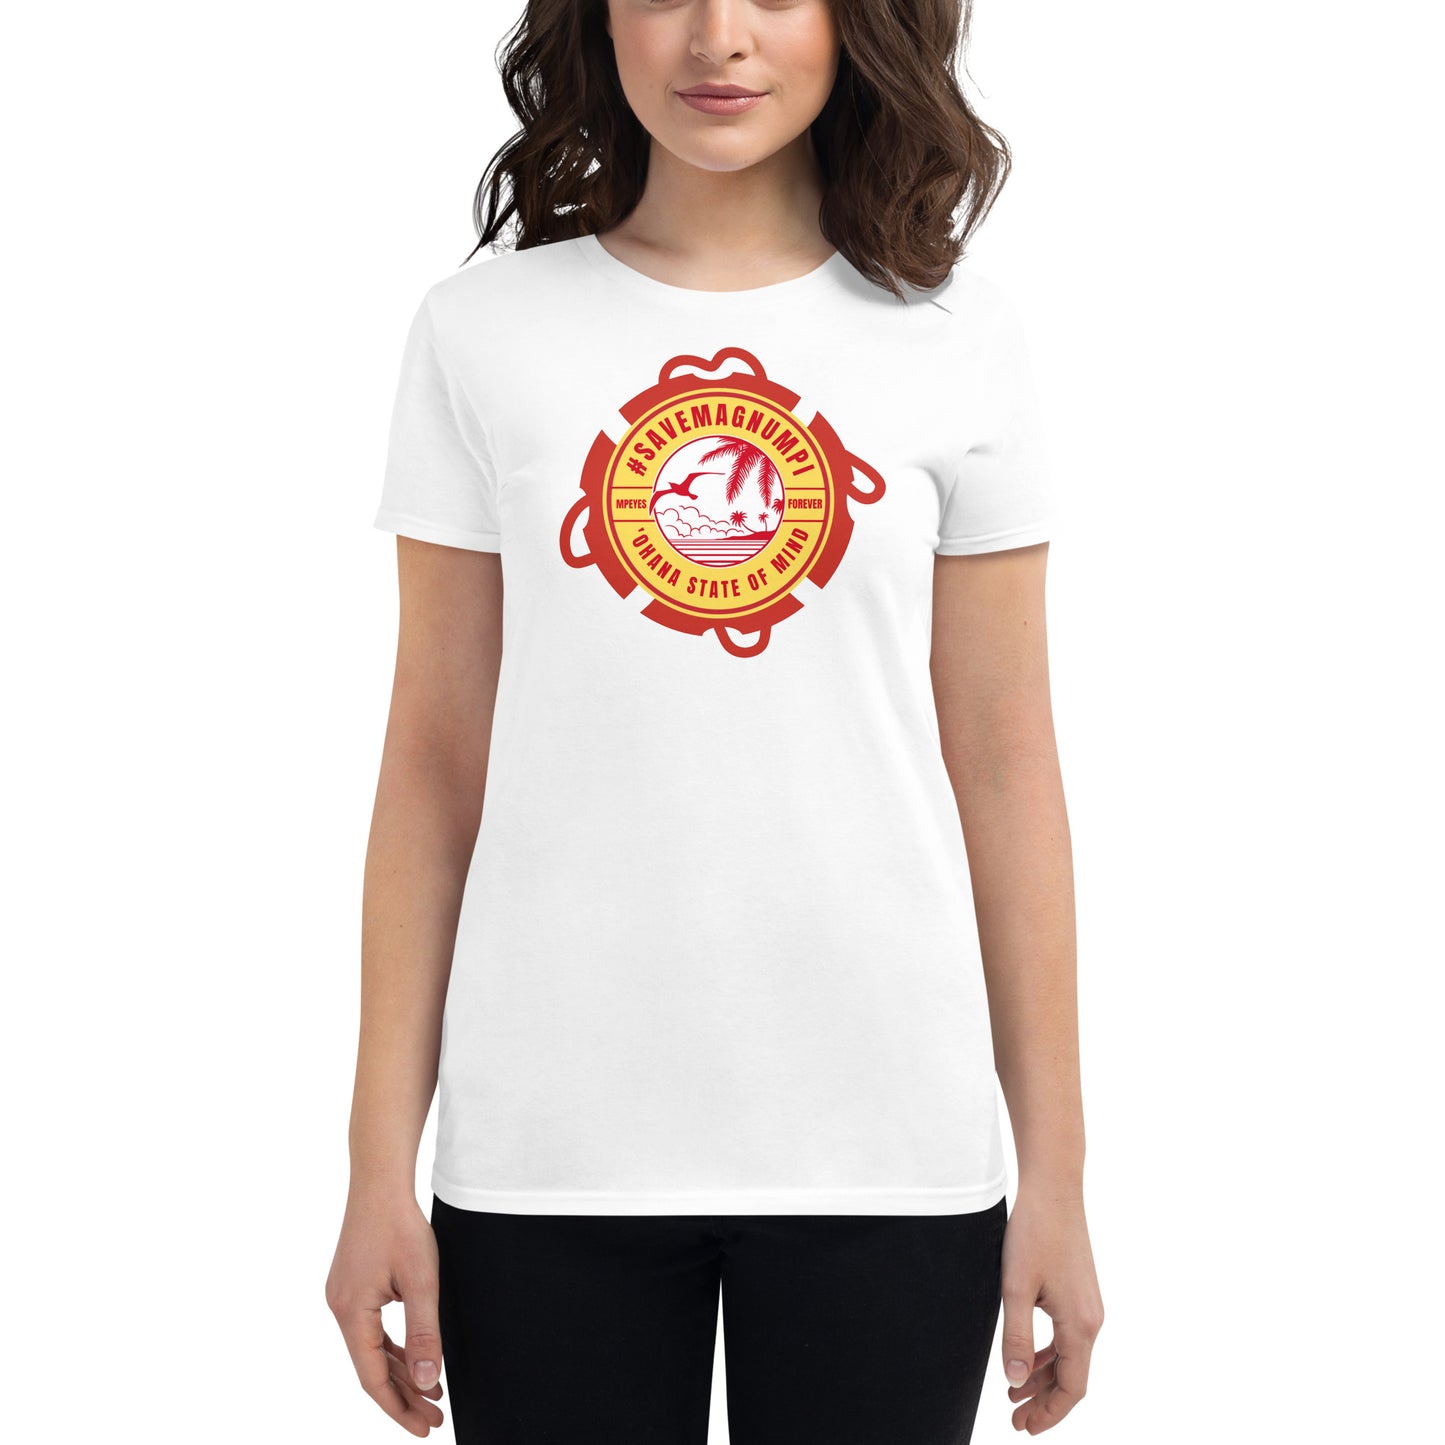 #SAVEMANGNUMPI Fitted Women's Tee - 2 colors